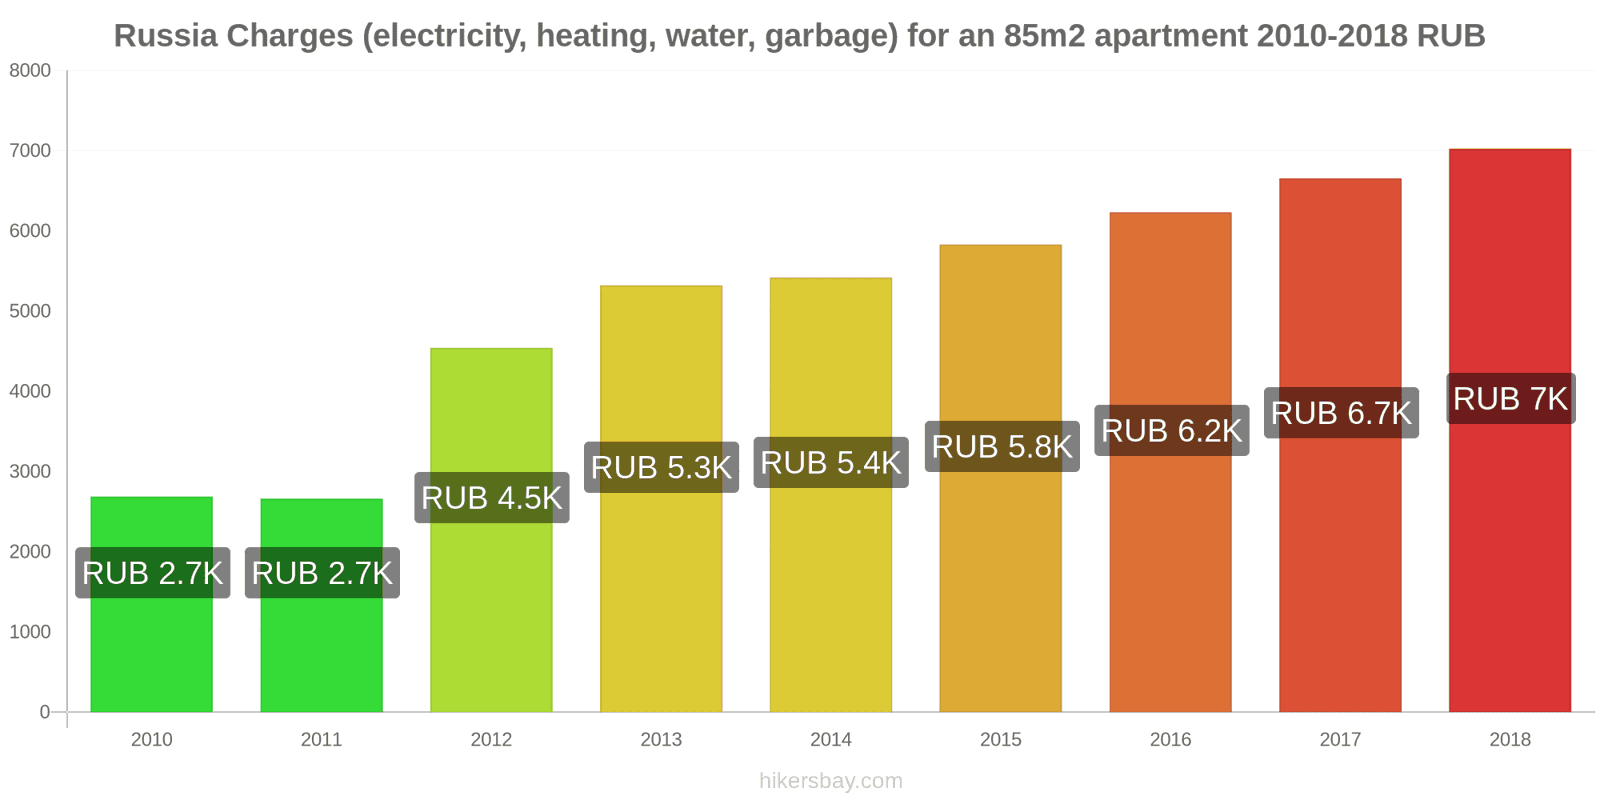 Russia price changes Utilities (electricity, heating, water, garbage) for an 85m2 apartment hikersbay.com